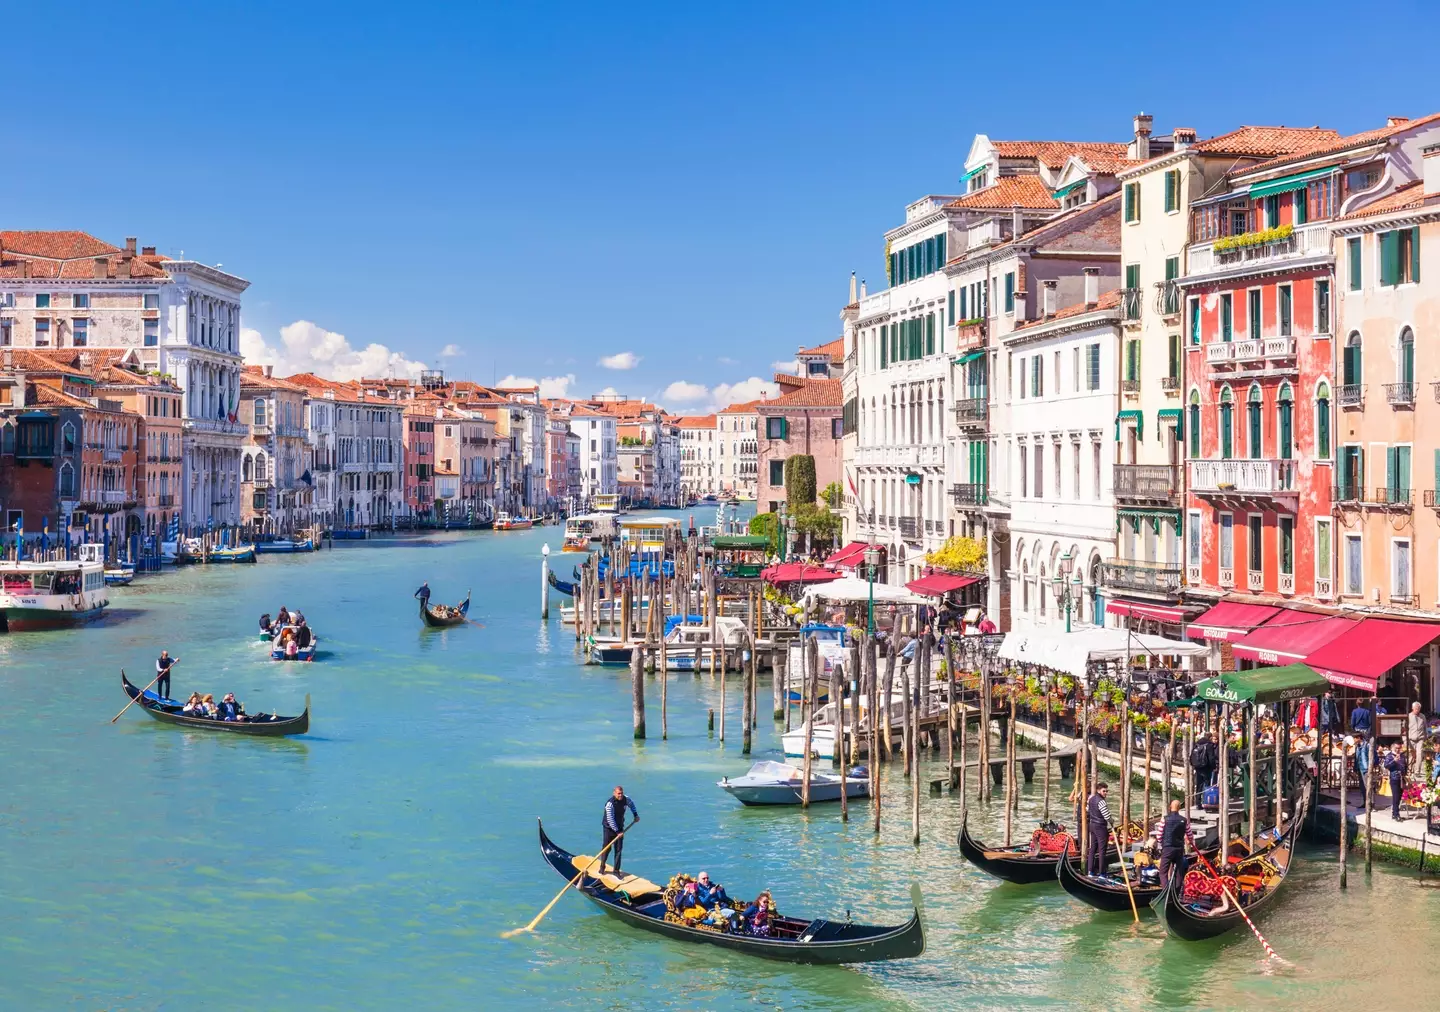 Tourists wanting to visit Venice for a day will soon have to pay a fee.